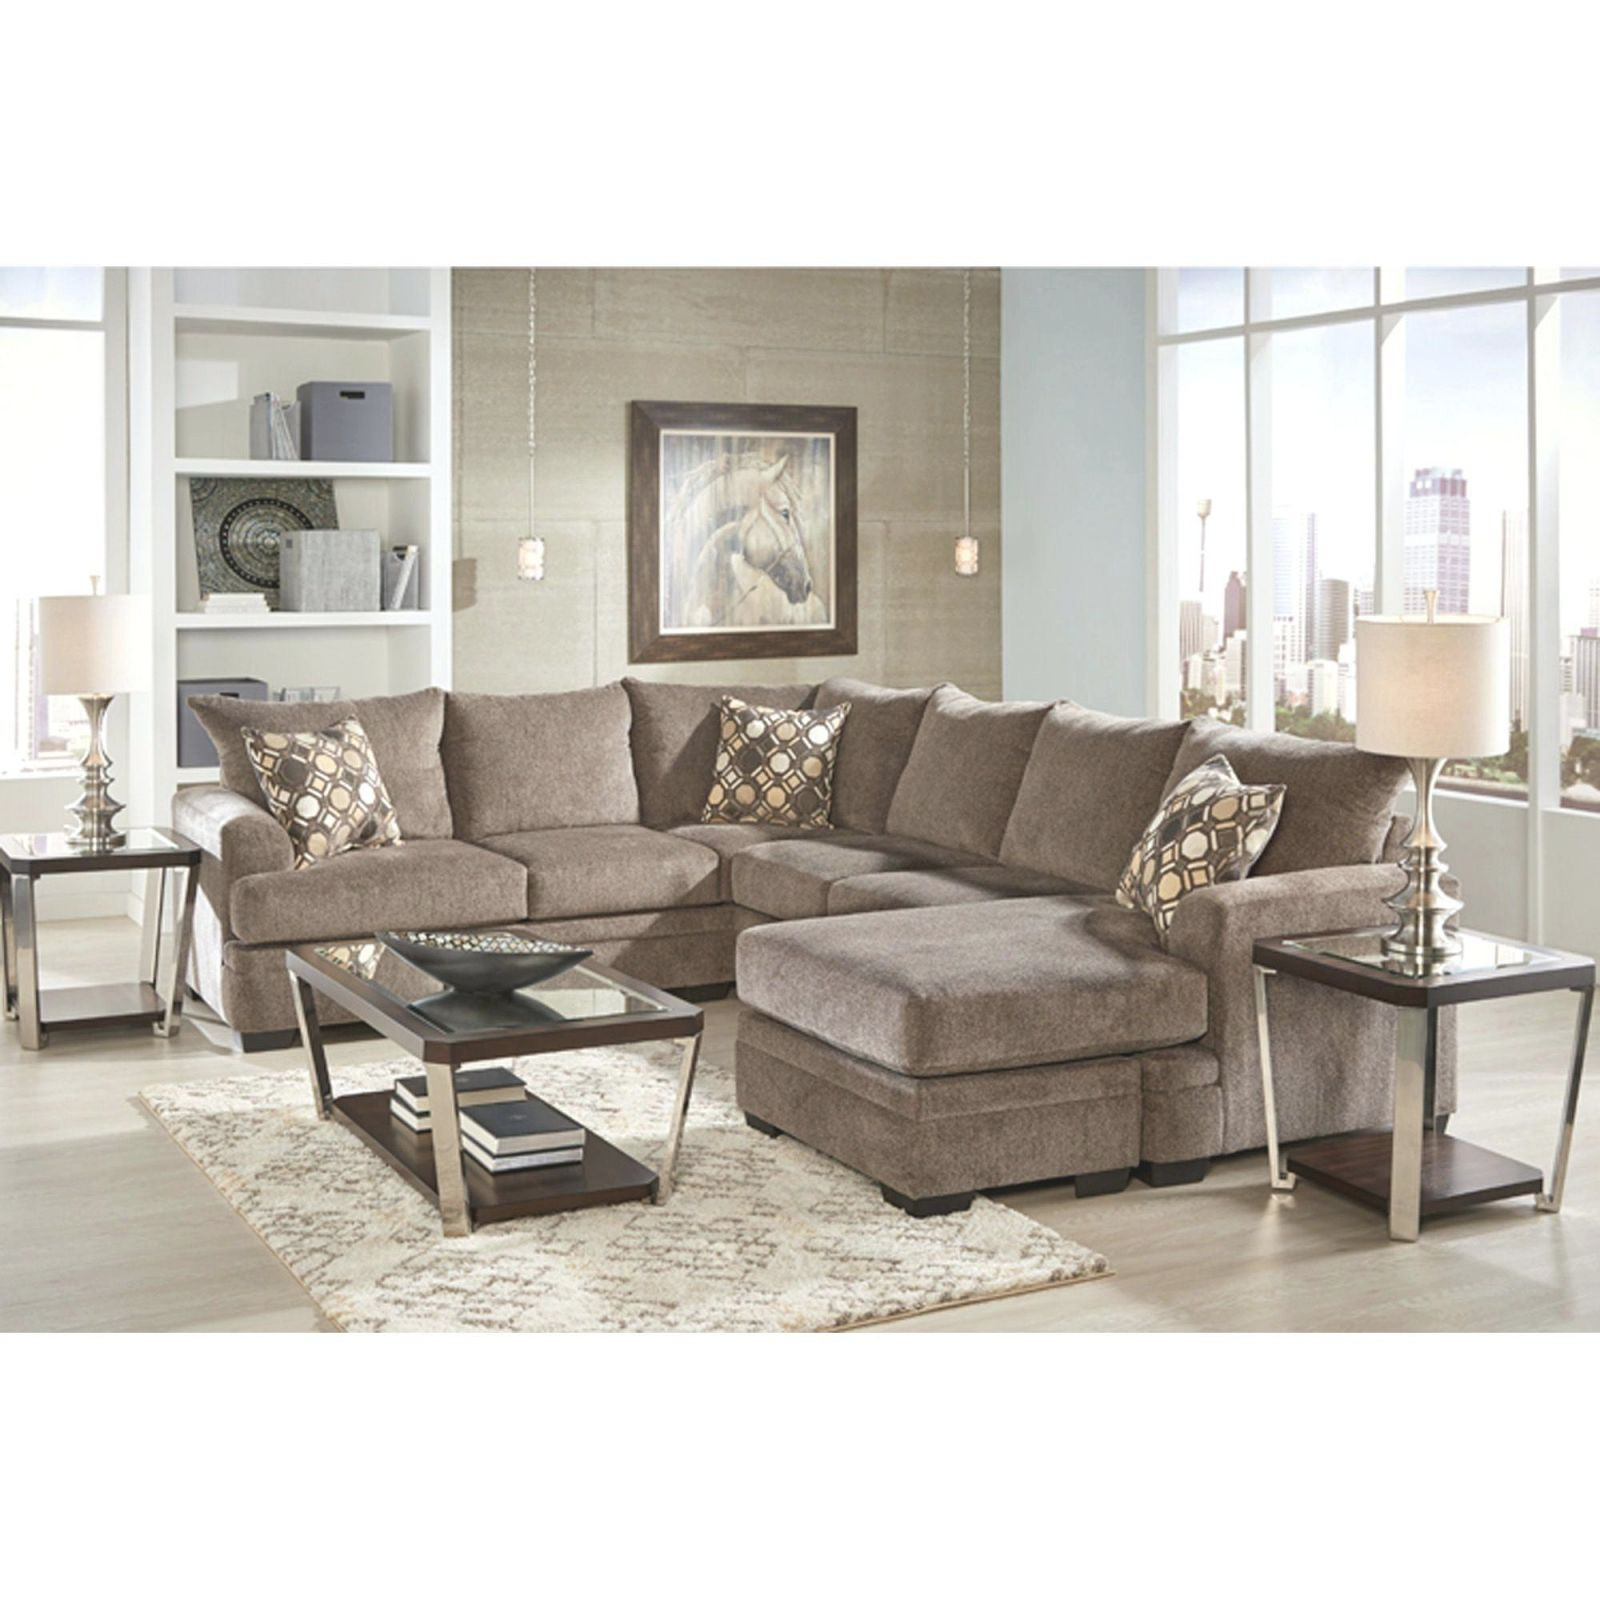 Modern Living Room Sets Cheap
 Best of Cheap Living Room Furniture Sets Awesome Decors